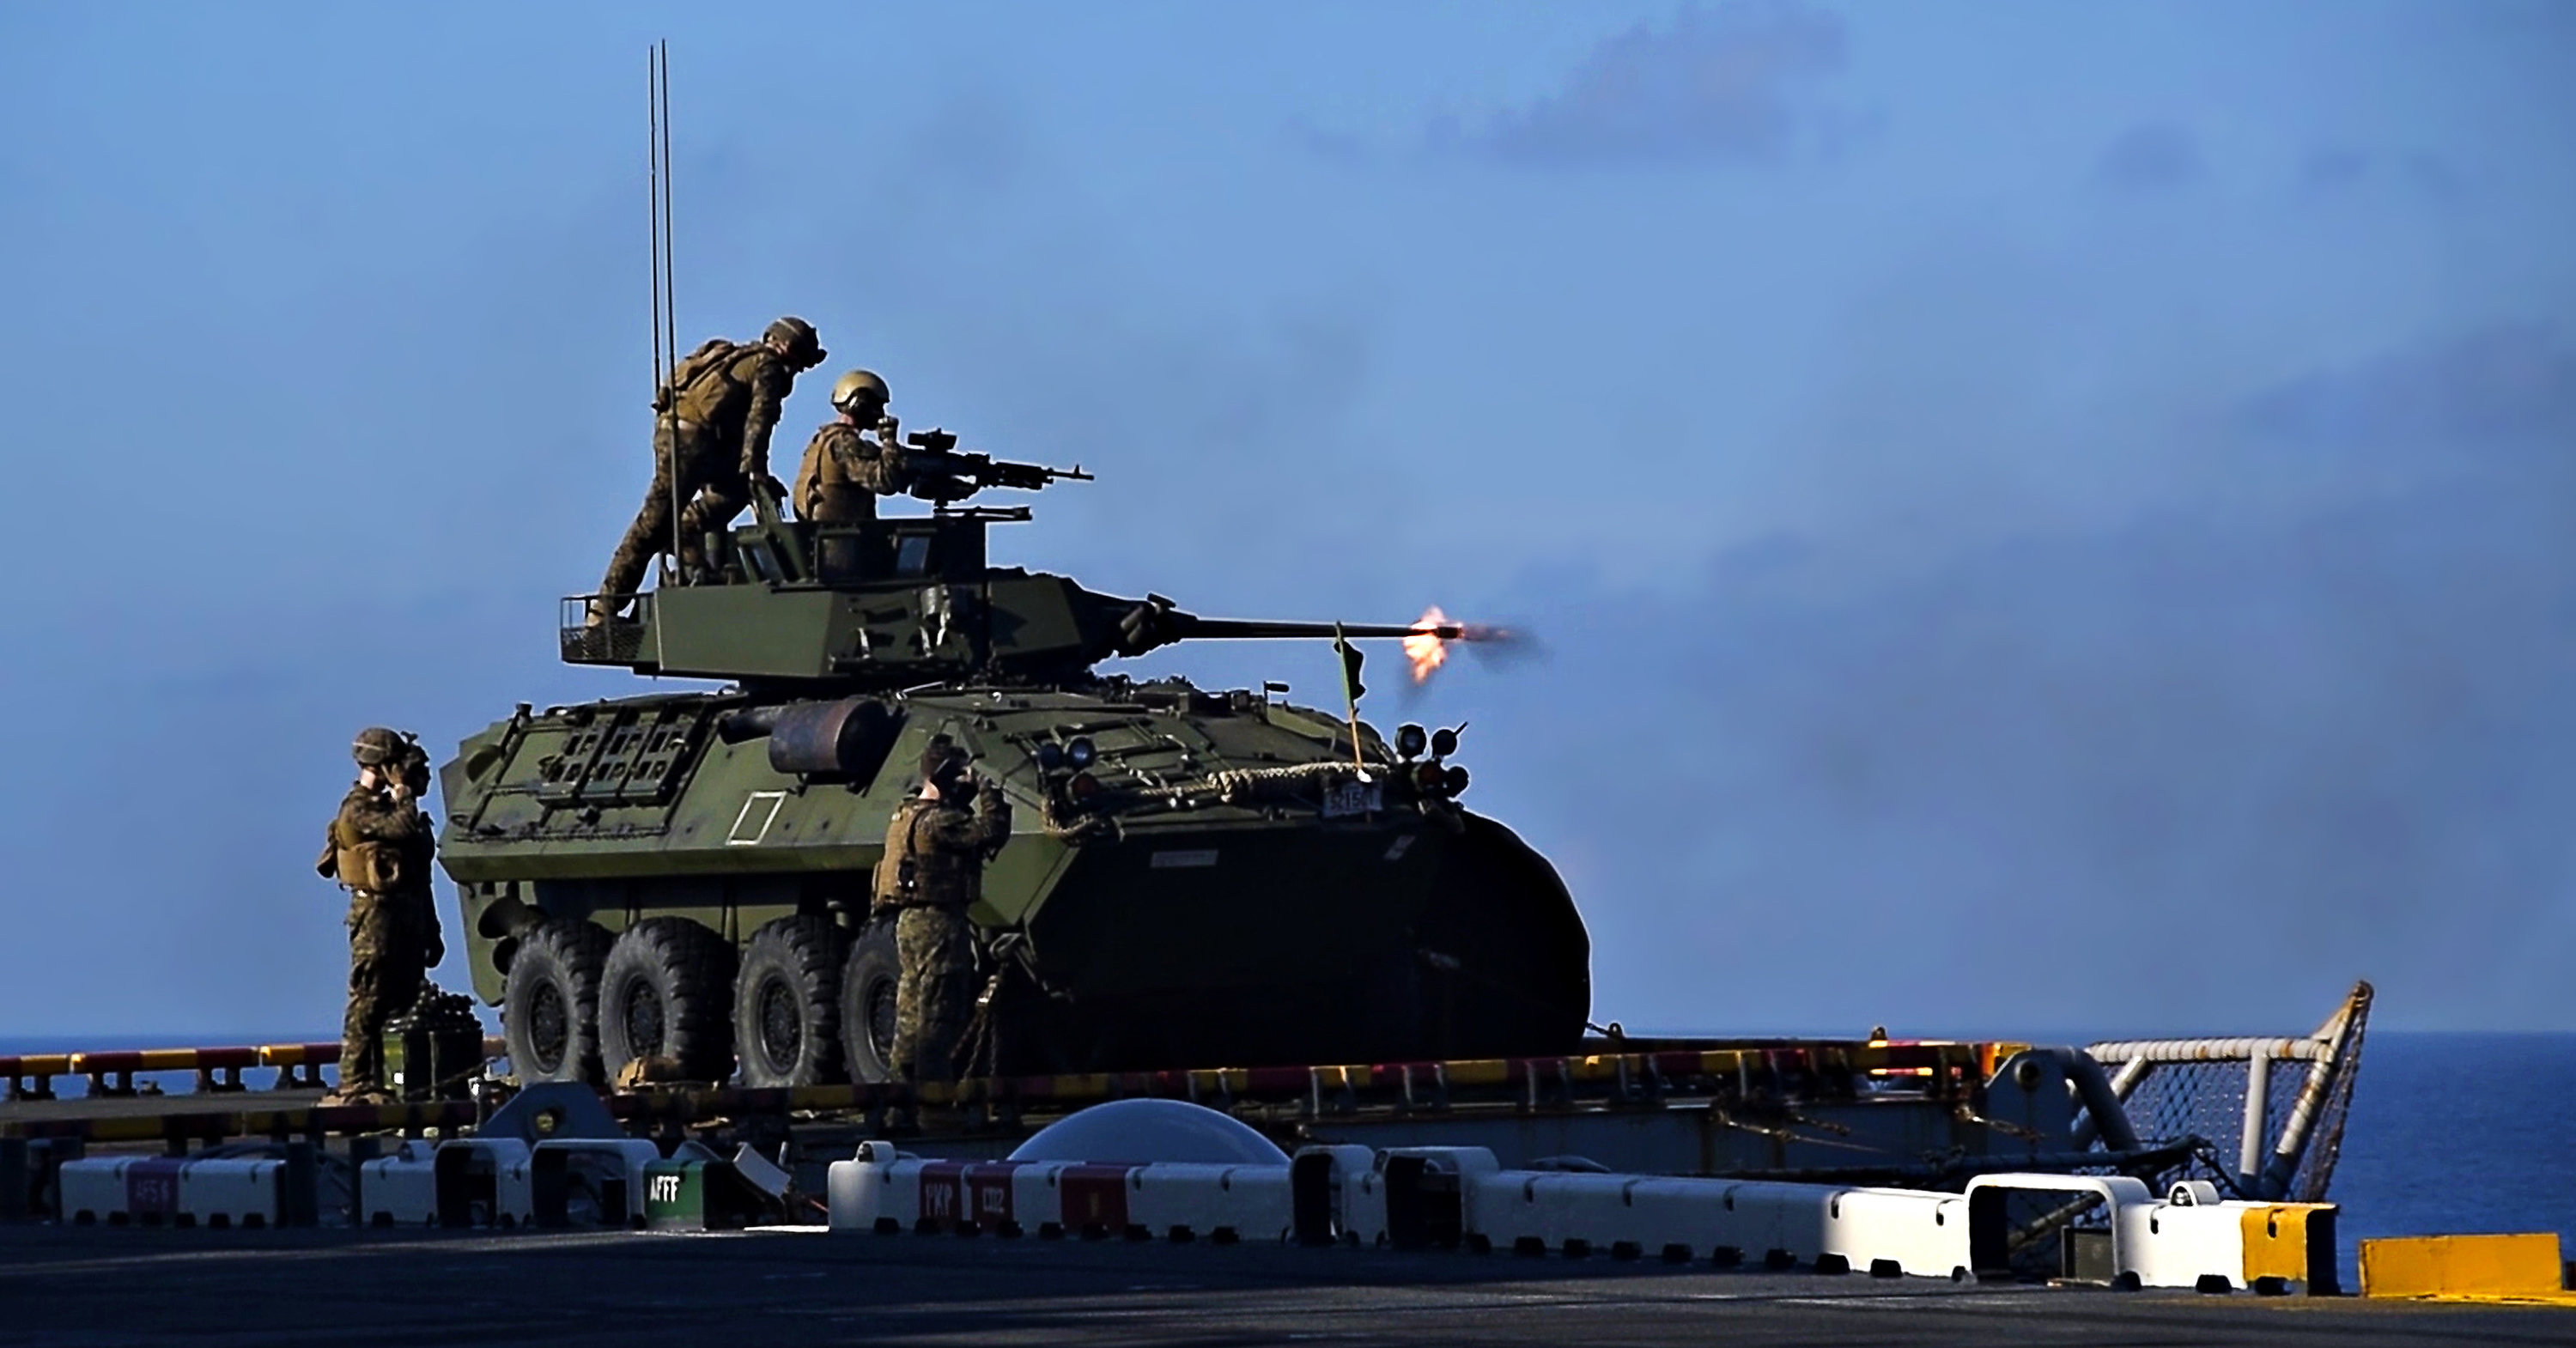 This infantry fighting vehicle has the firepower of a tank